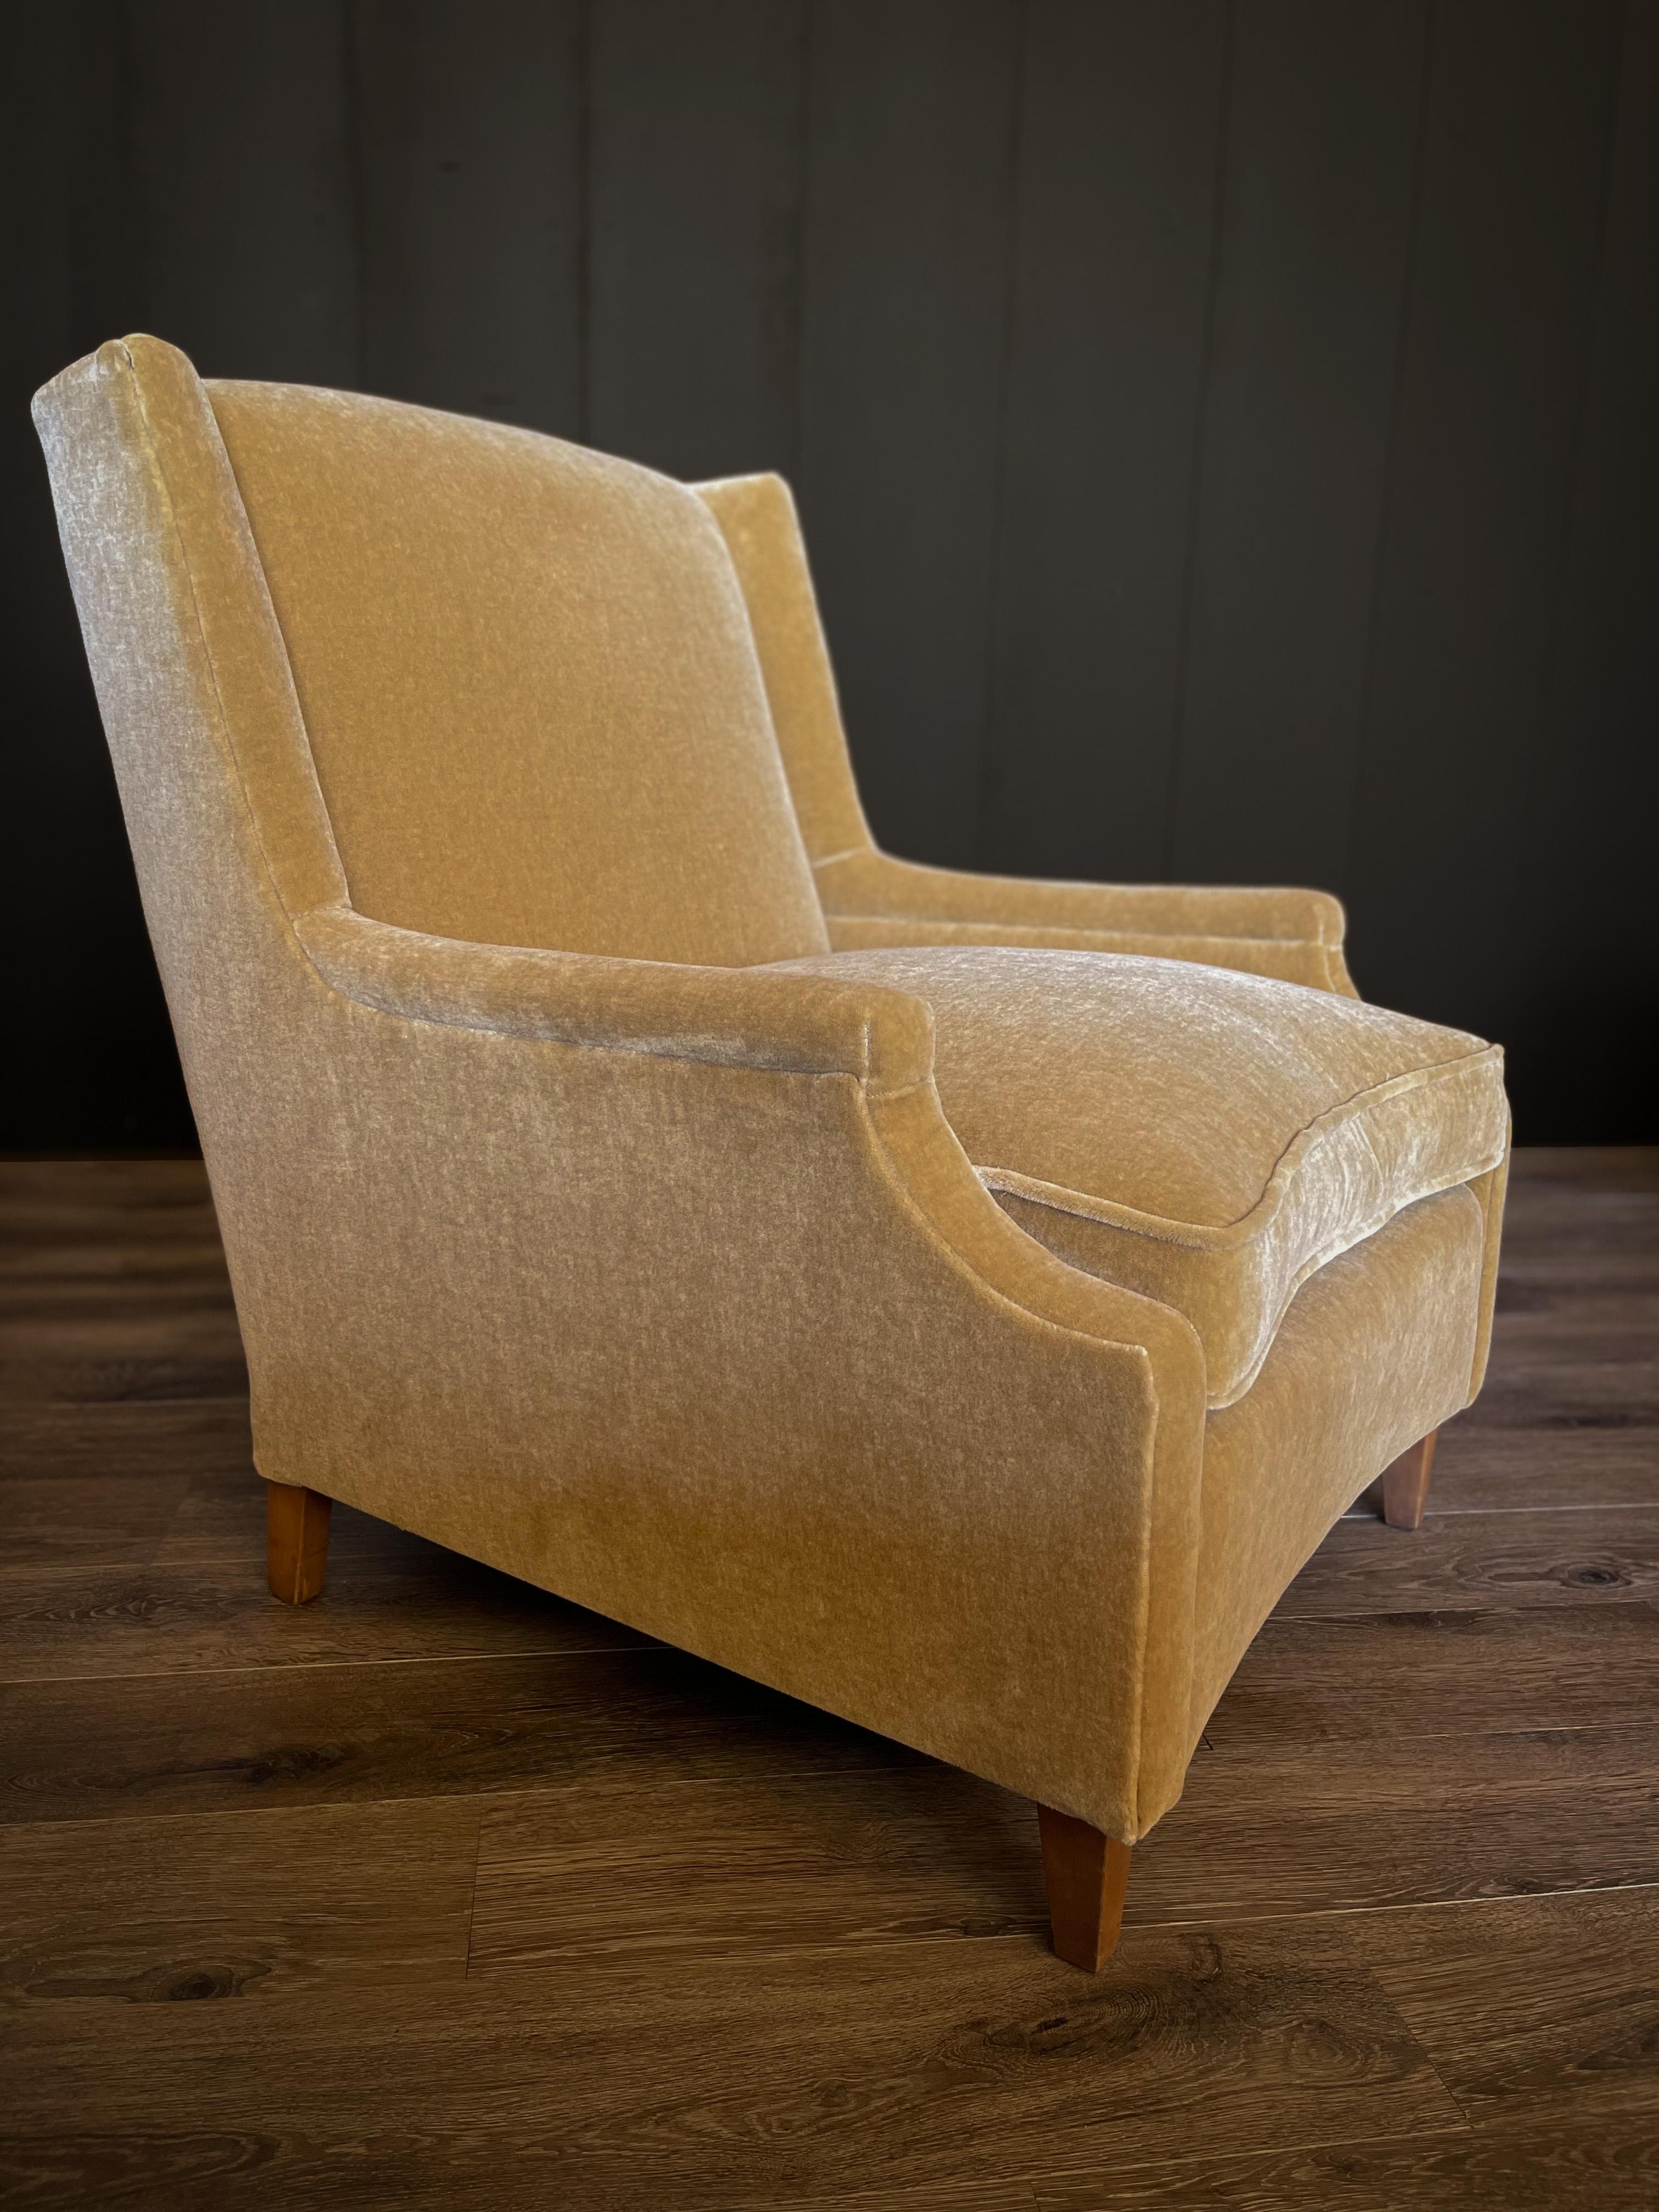 Vintage French Mohair Lounge Chairs, Art Deco, Early Mid Century, Pair For Sale 1